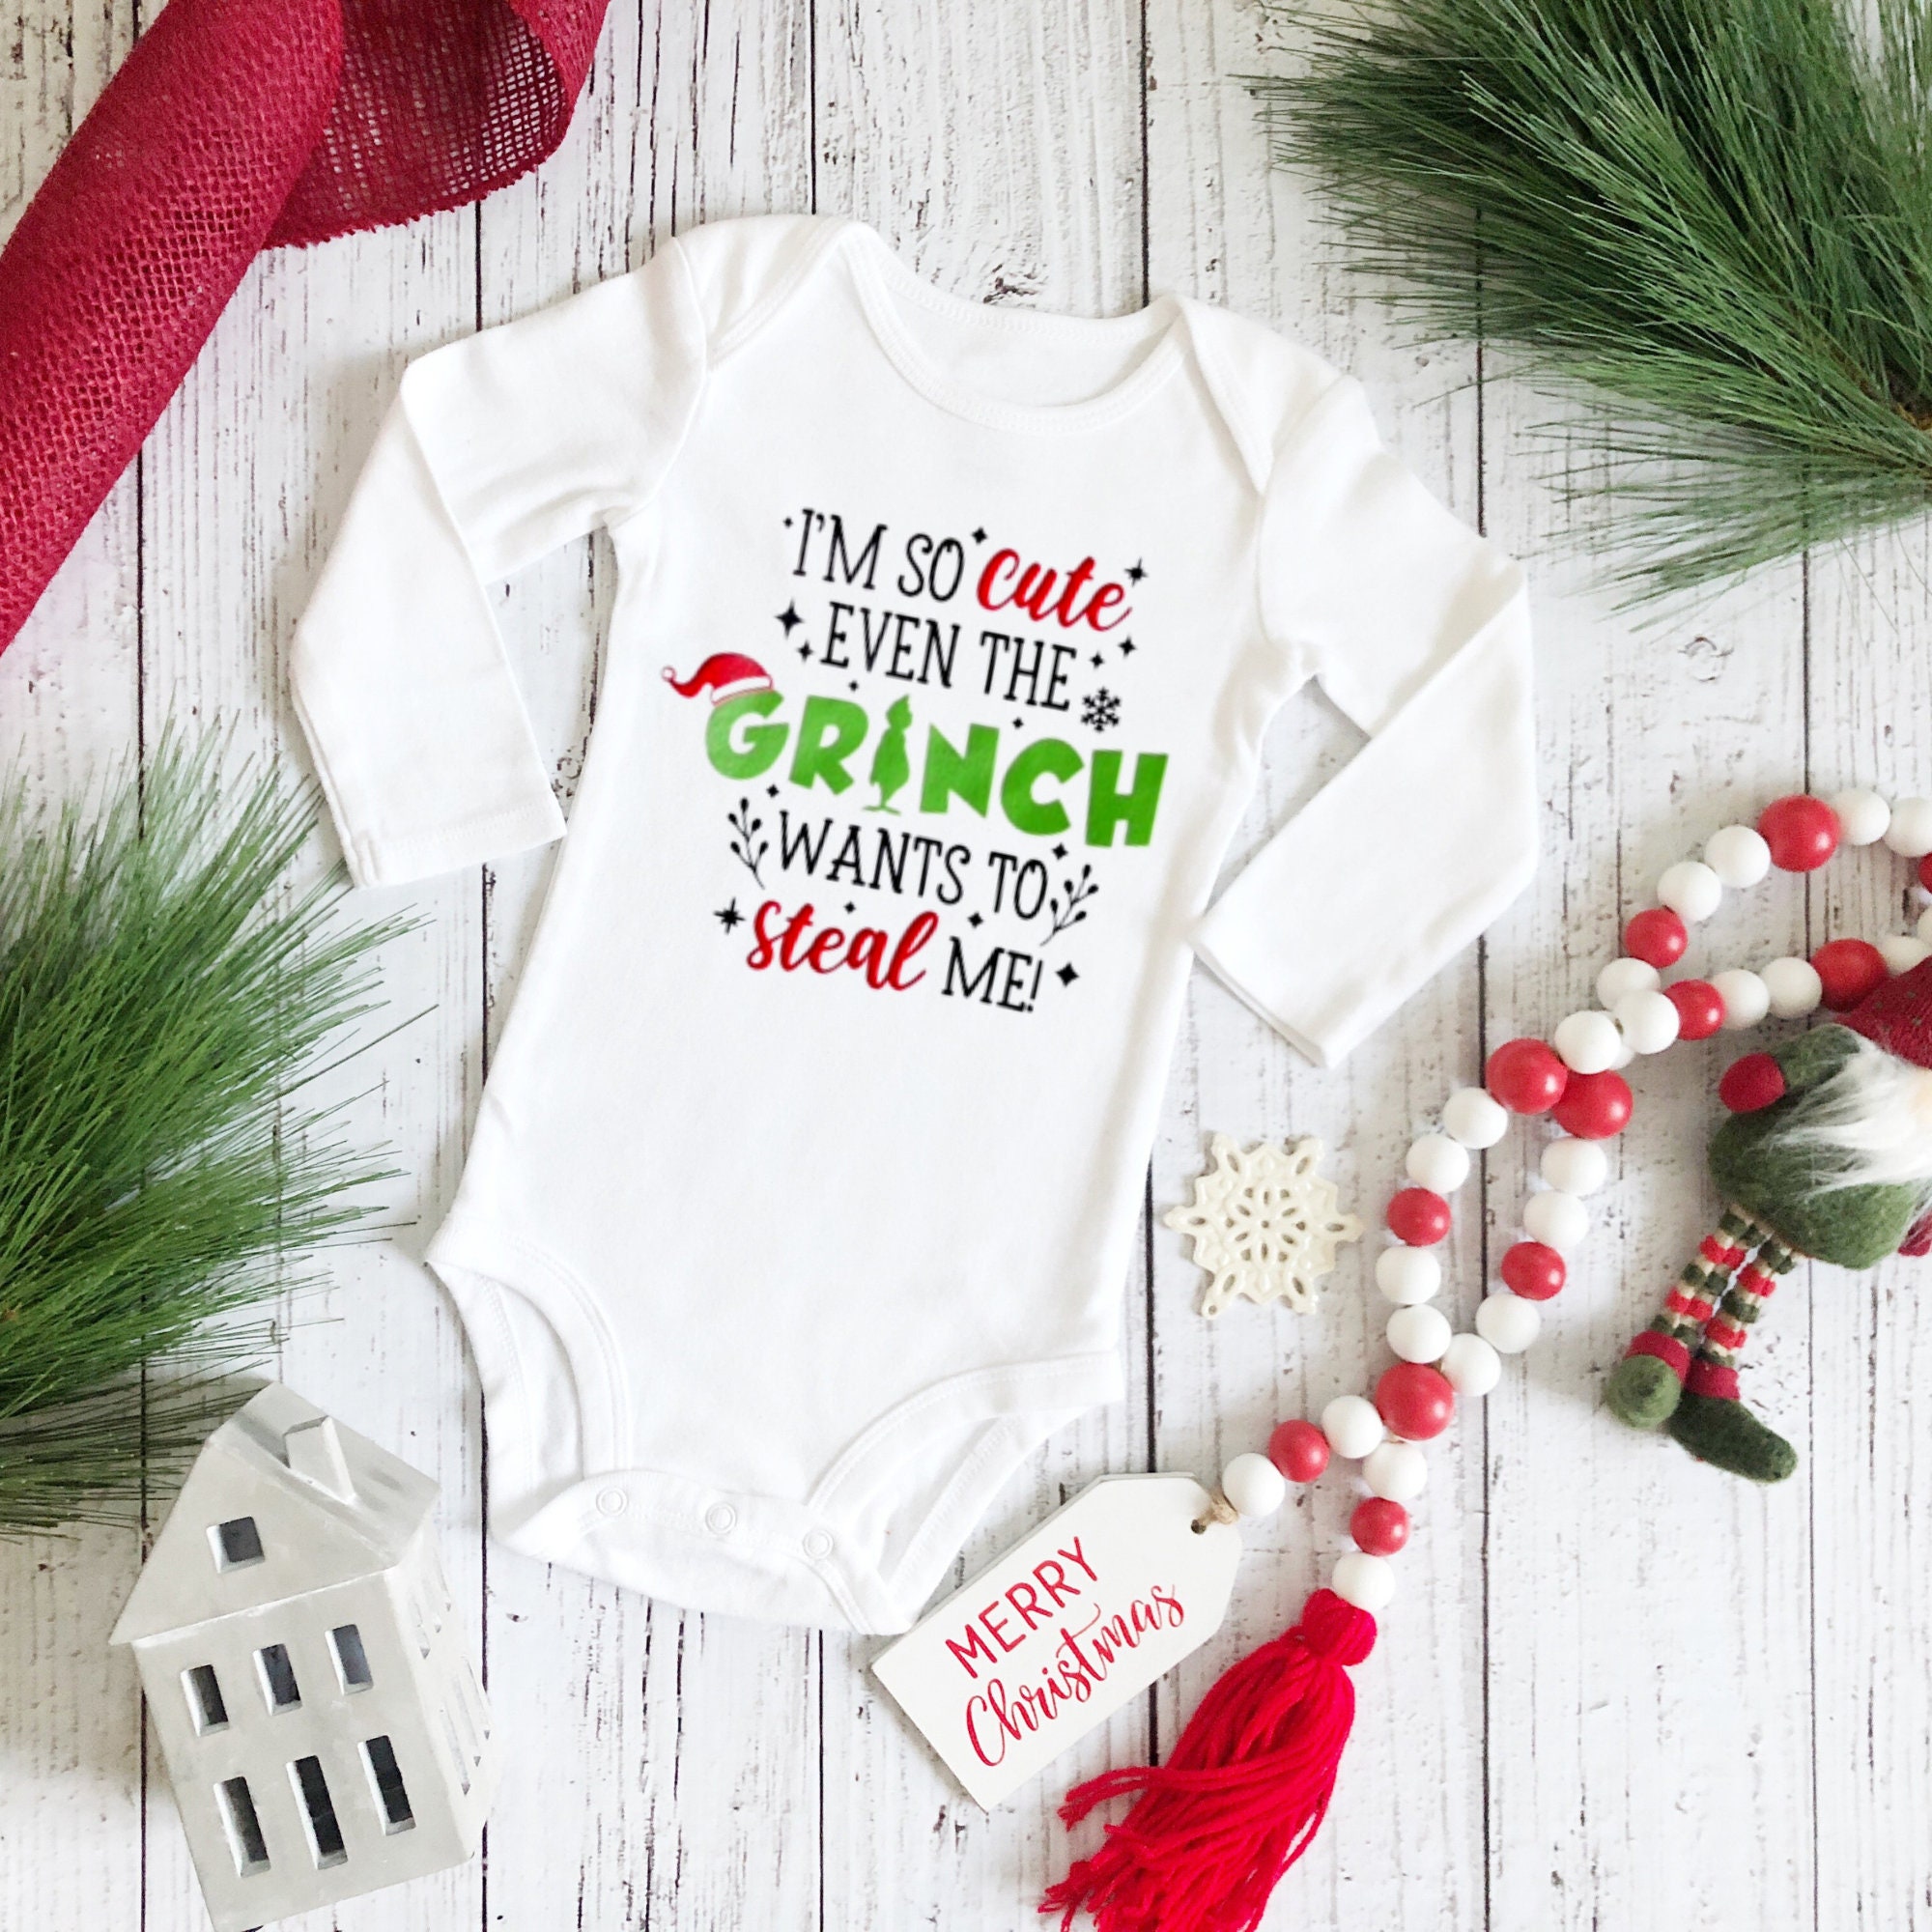  elope Dr. Seuss The Grinch Santa Costume for Infants, Baby  Grinch Christmas Onesie, Grinch Outfit for Babies 1st Christmas 0/3MO :  Clothing, Shoes & Jewelry